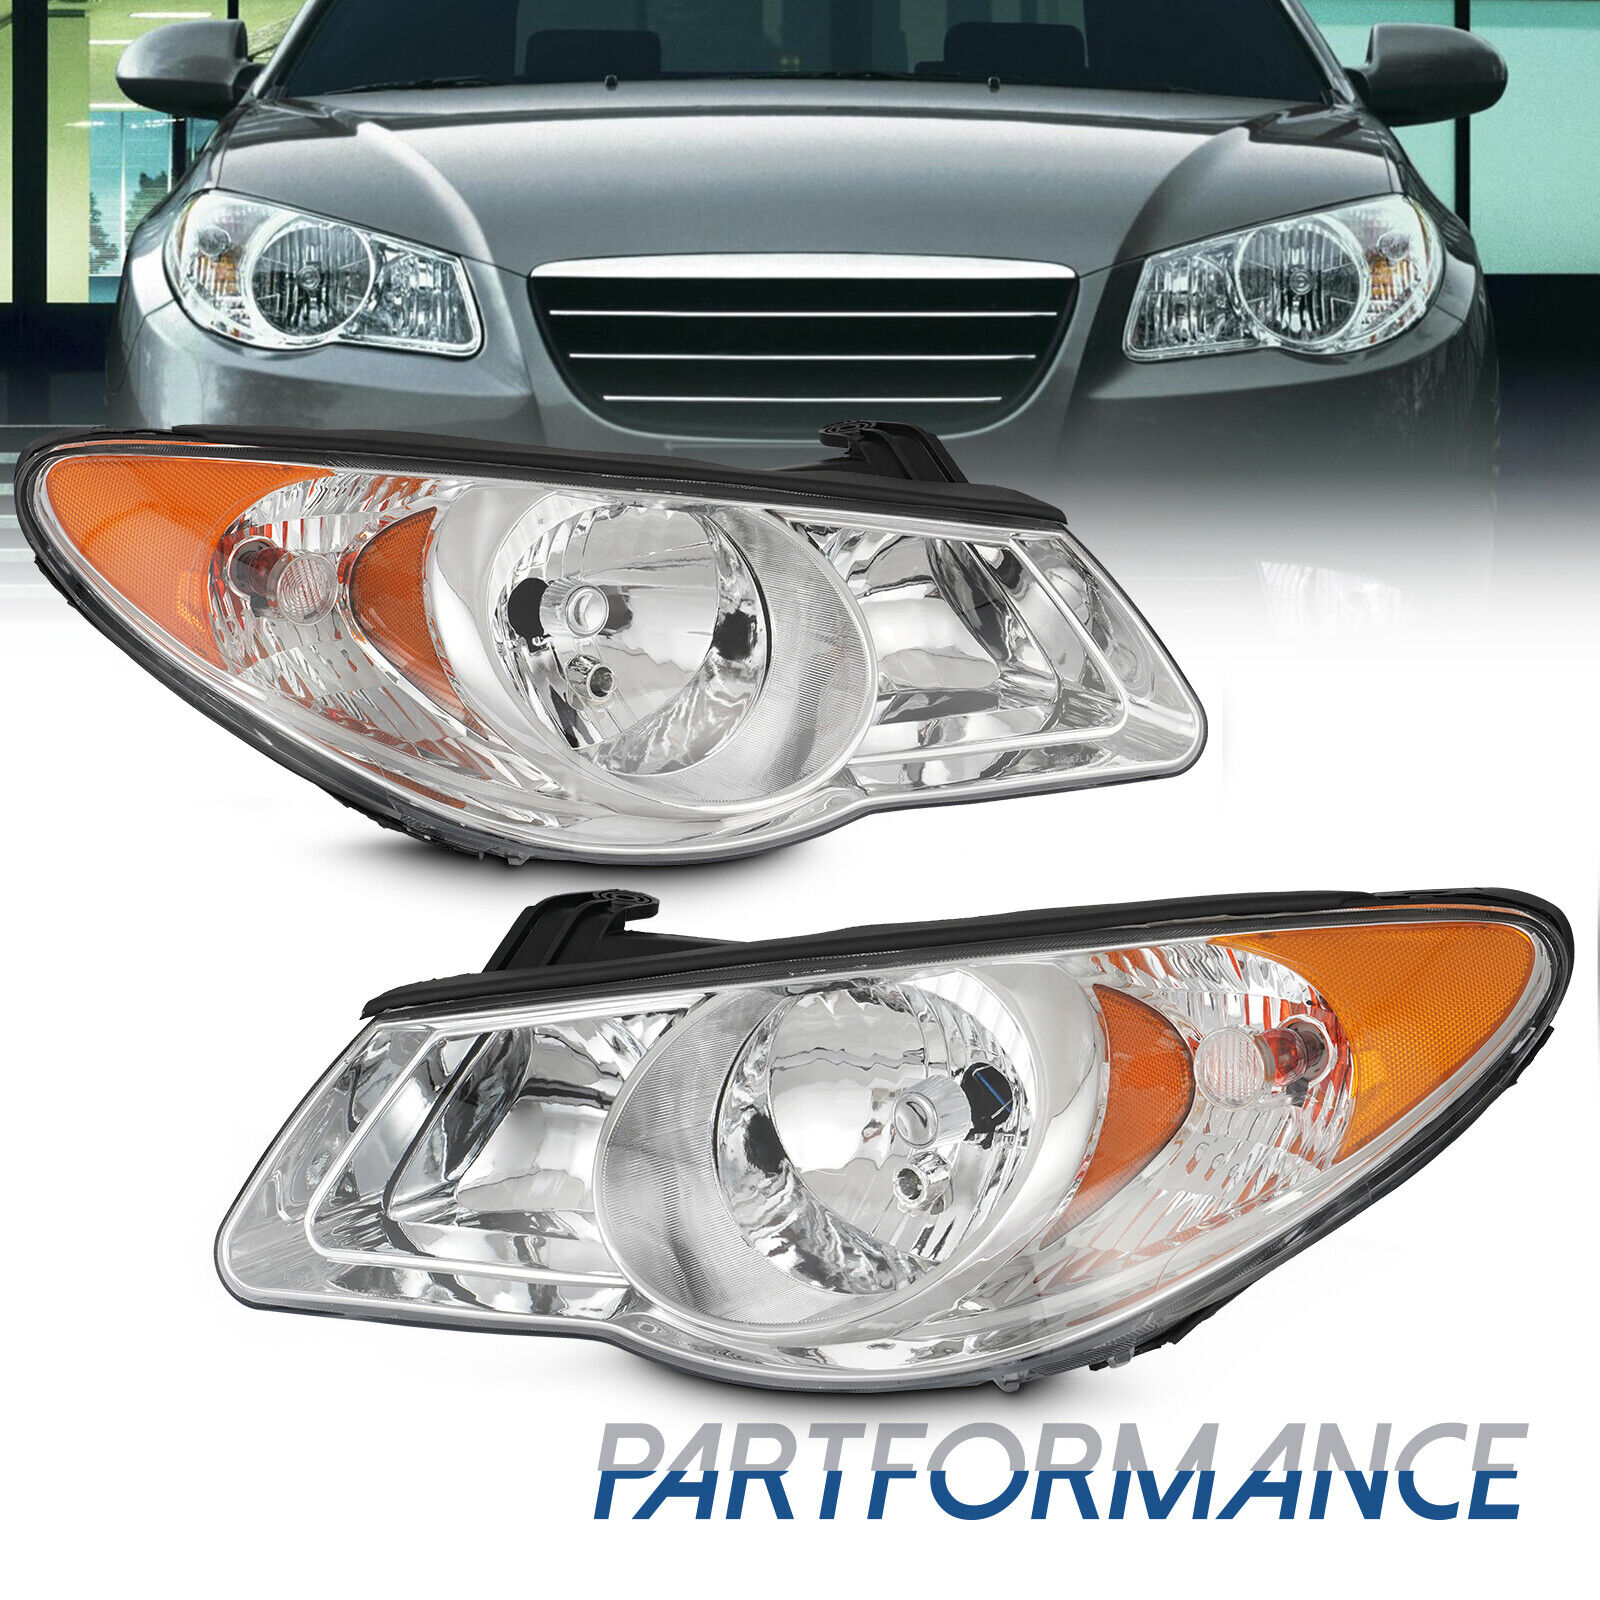 For 2007-2010 Elantra Headlights Headlamps Replacement 07 08 09 10 Left+Right